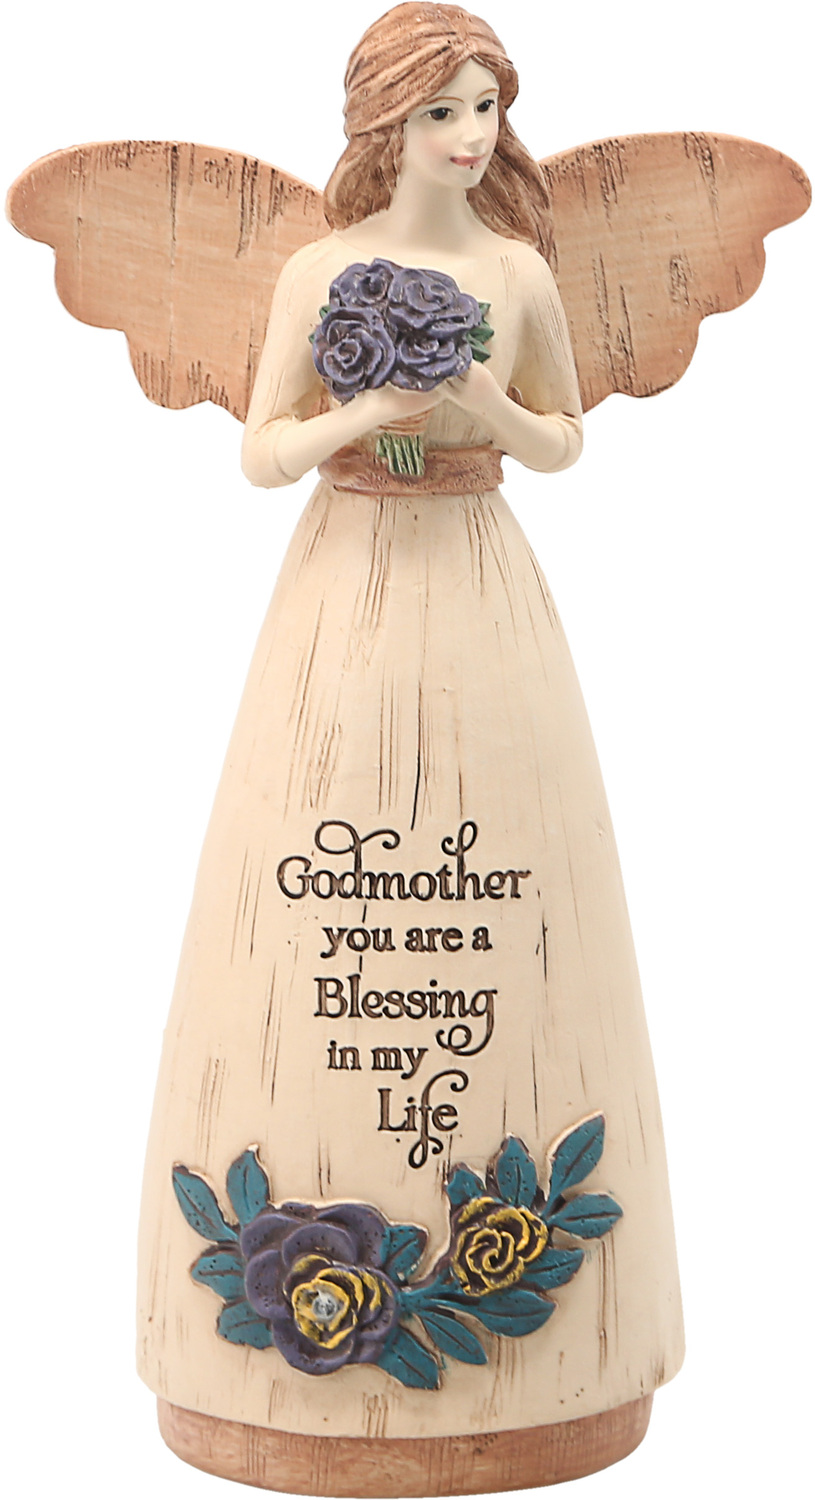 Godmother by Simple Spirits - Godmother - 6" Angel